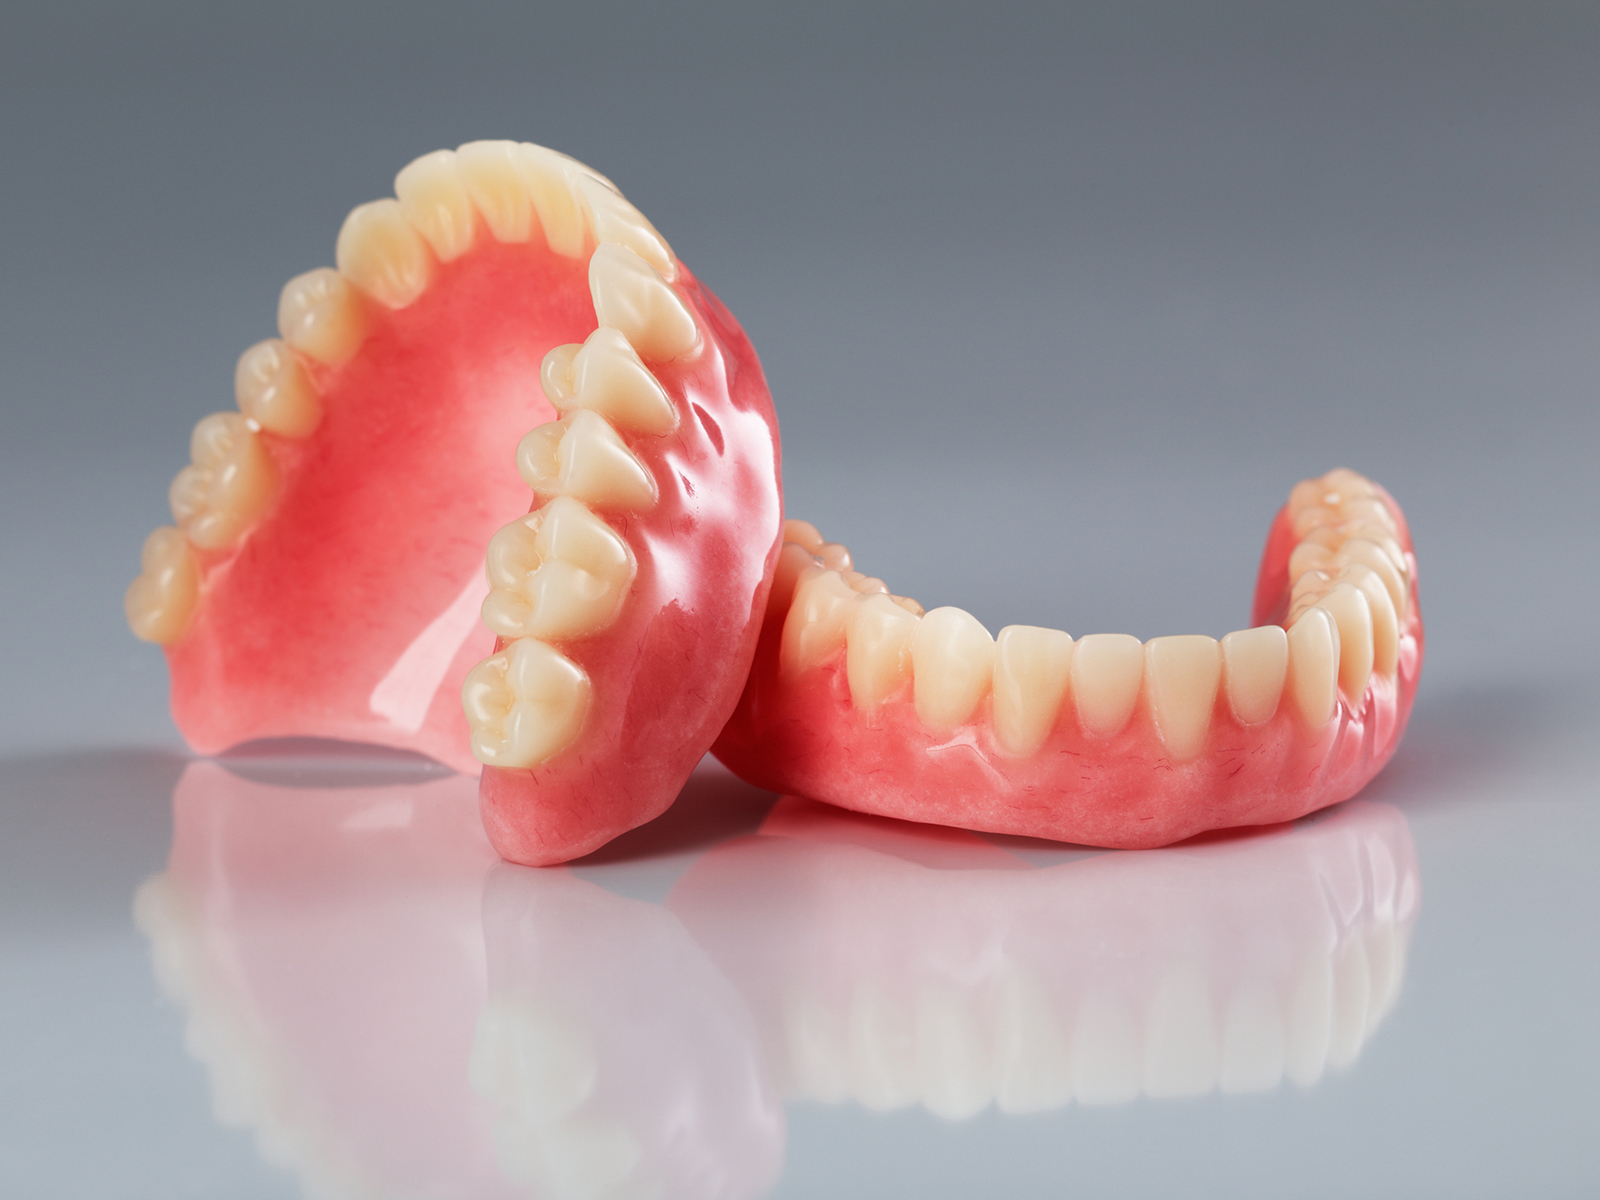 What are the highest quality dentures made of?